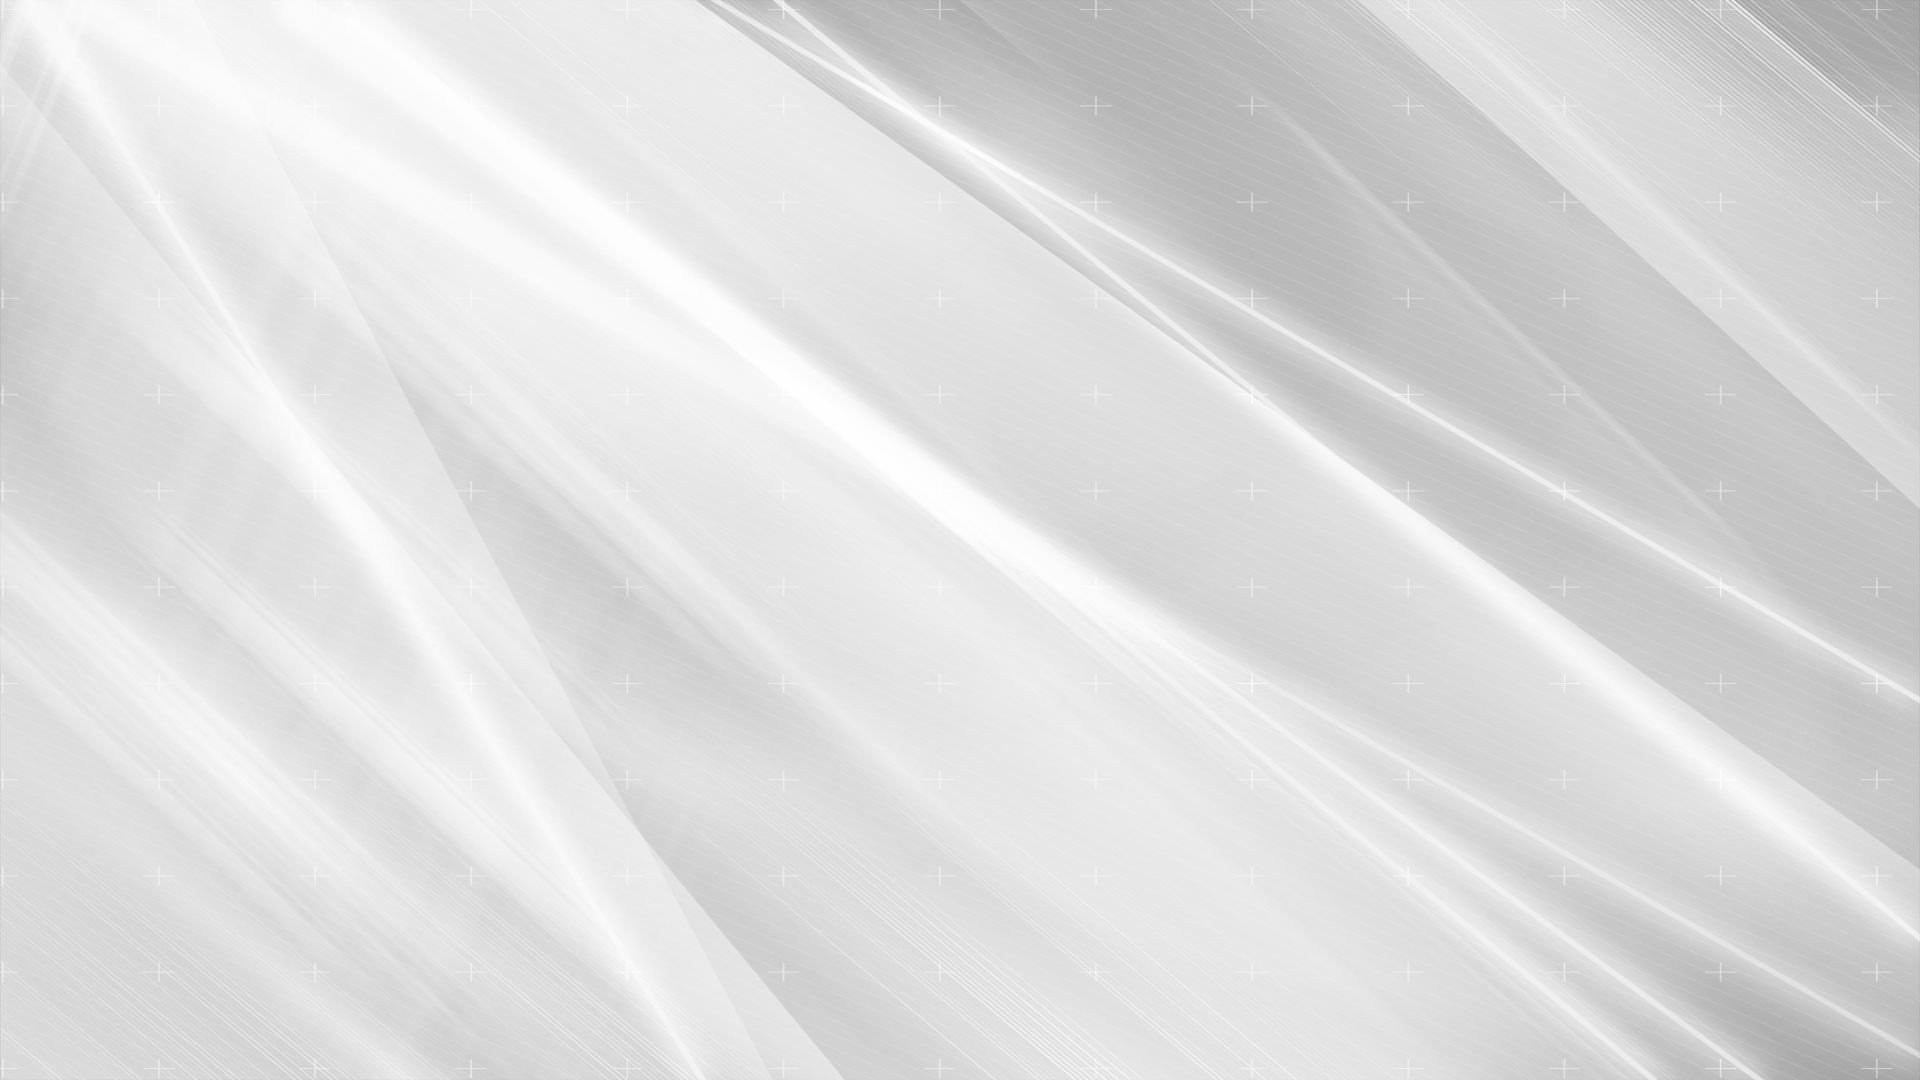 Attachment white abstract 75 wallpaper background hd 1920x1080